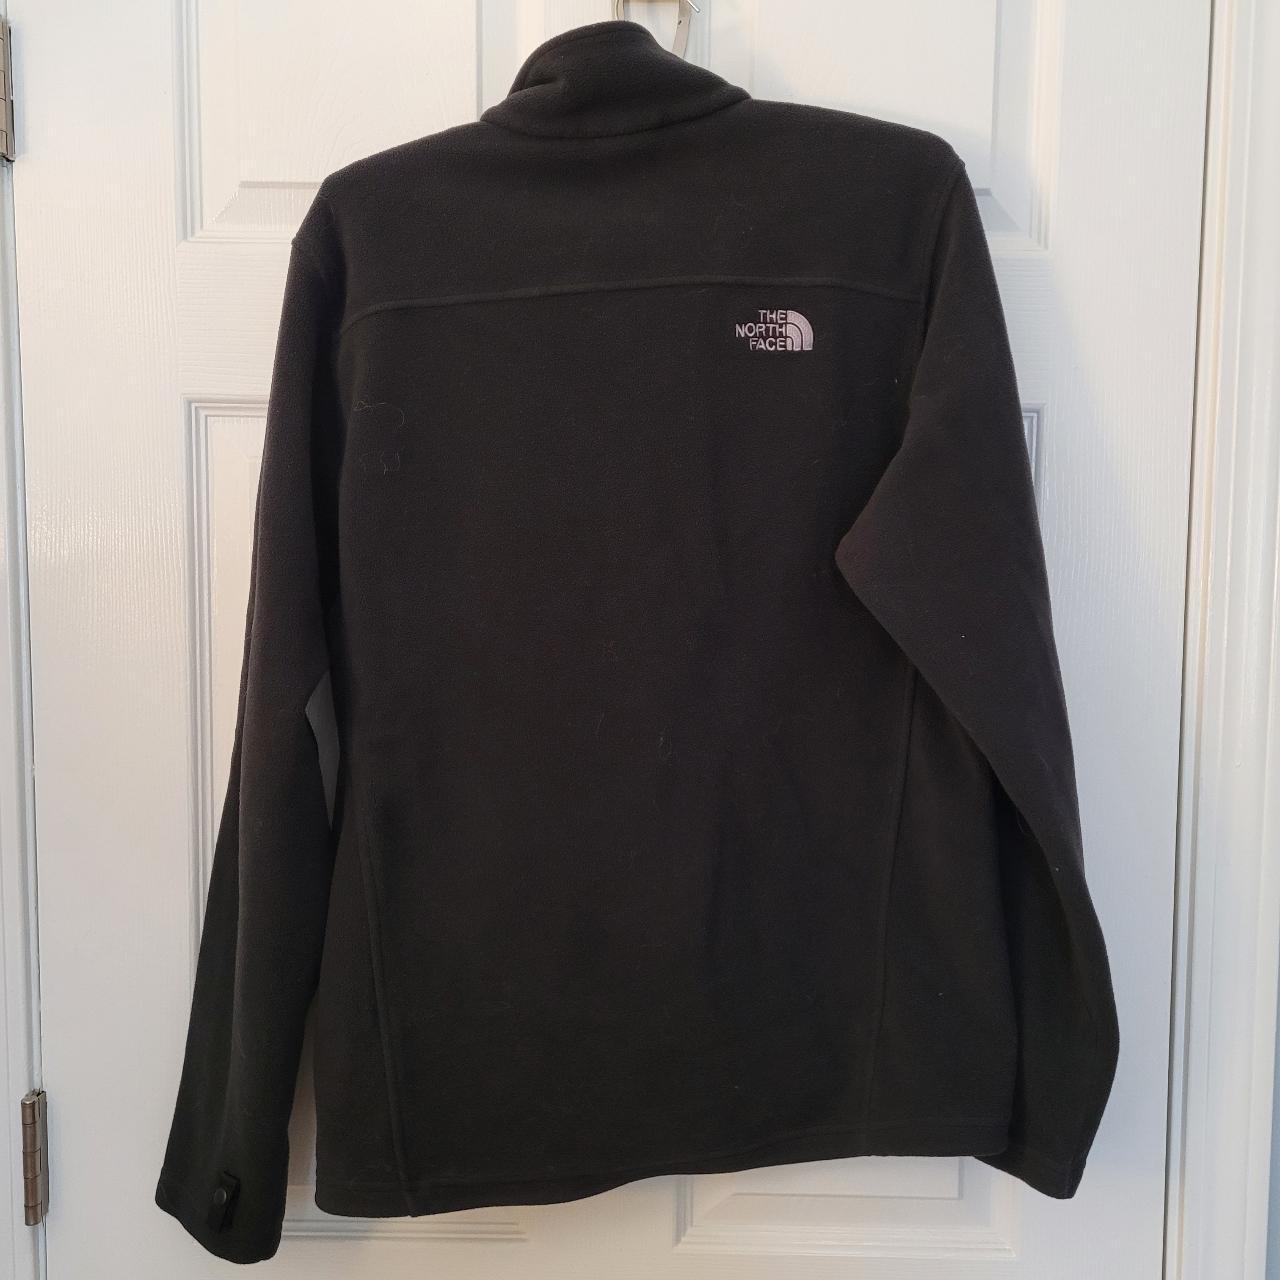 The North Face Men's Brown and Black Jacket (3)